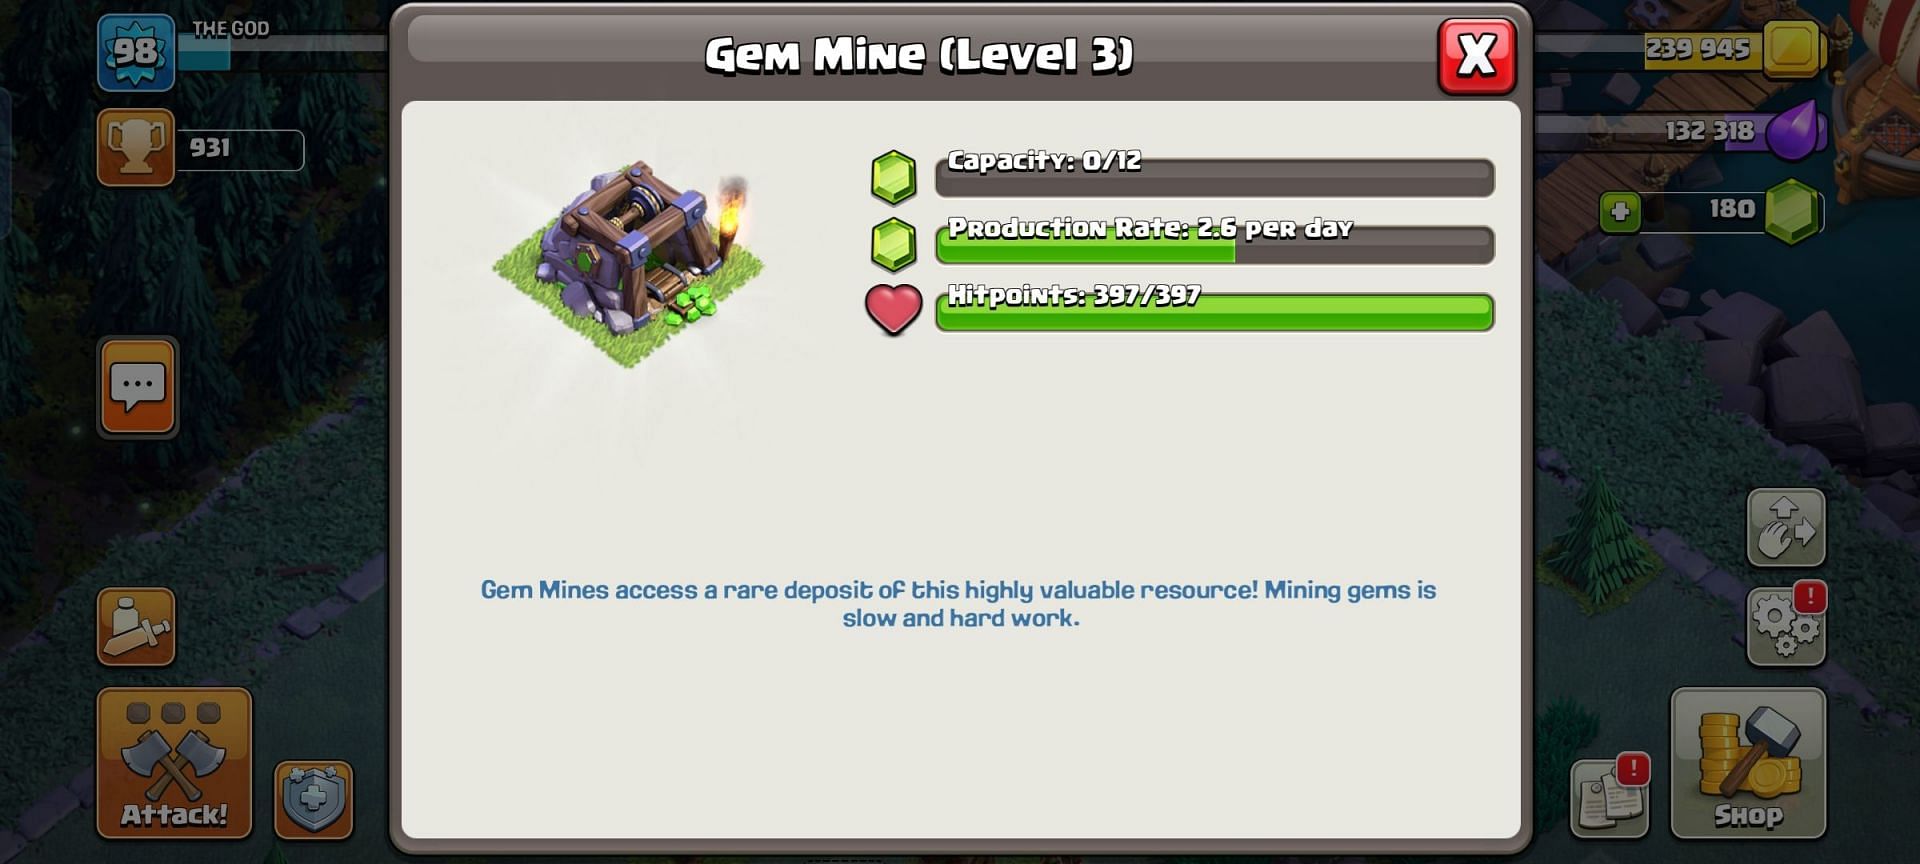 Gem Mine is one of the Buildings available in Builder Base (Image via Supercell)